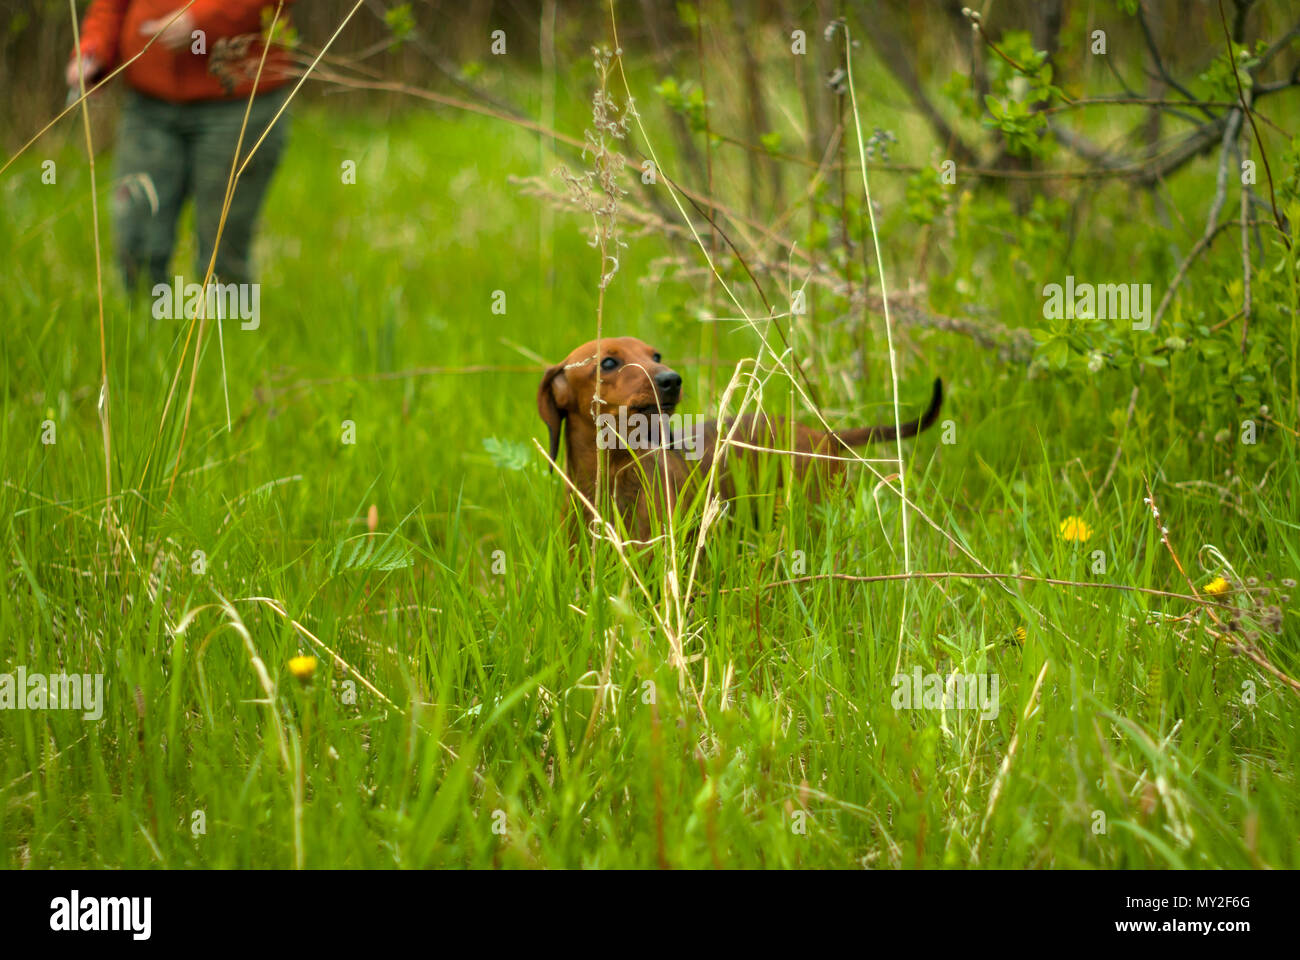 slightly blurred smooth dachshund in motion while walking on a meadow behind sharp stems of grass Stock Photo